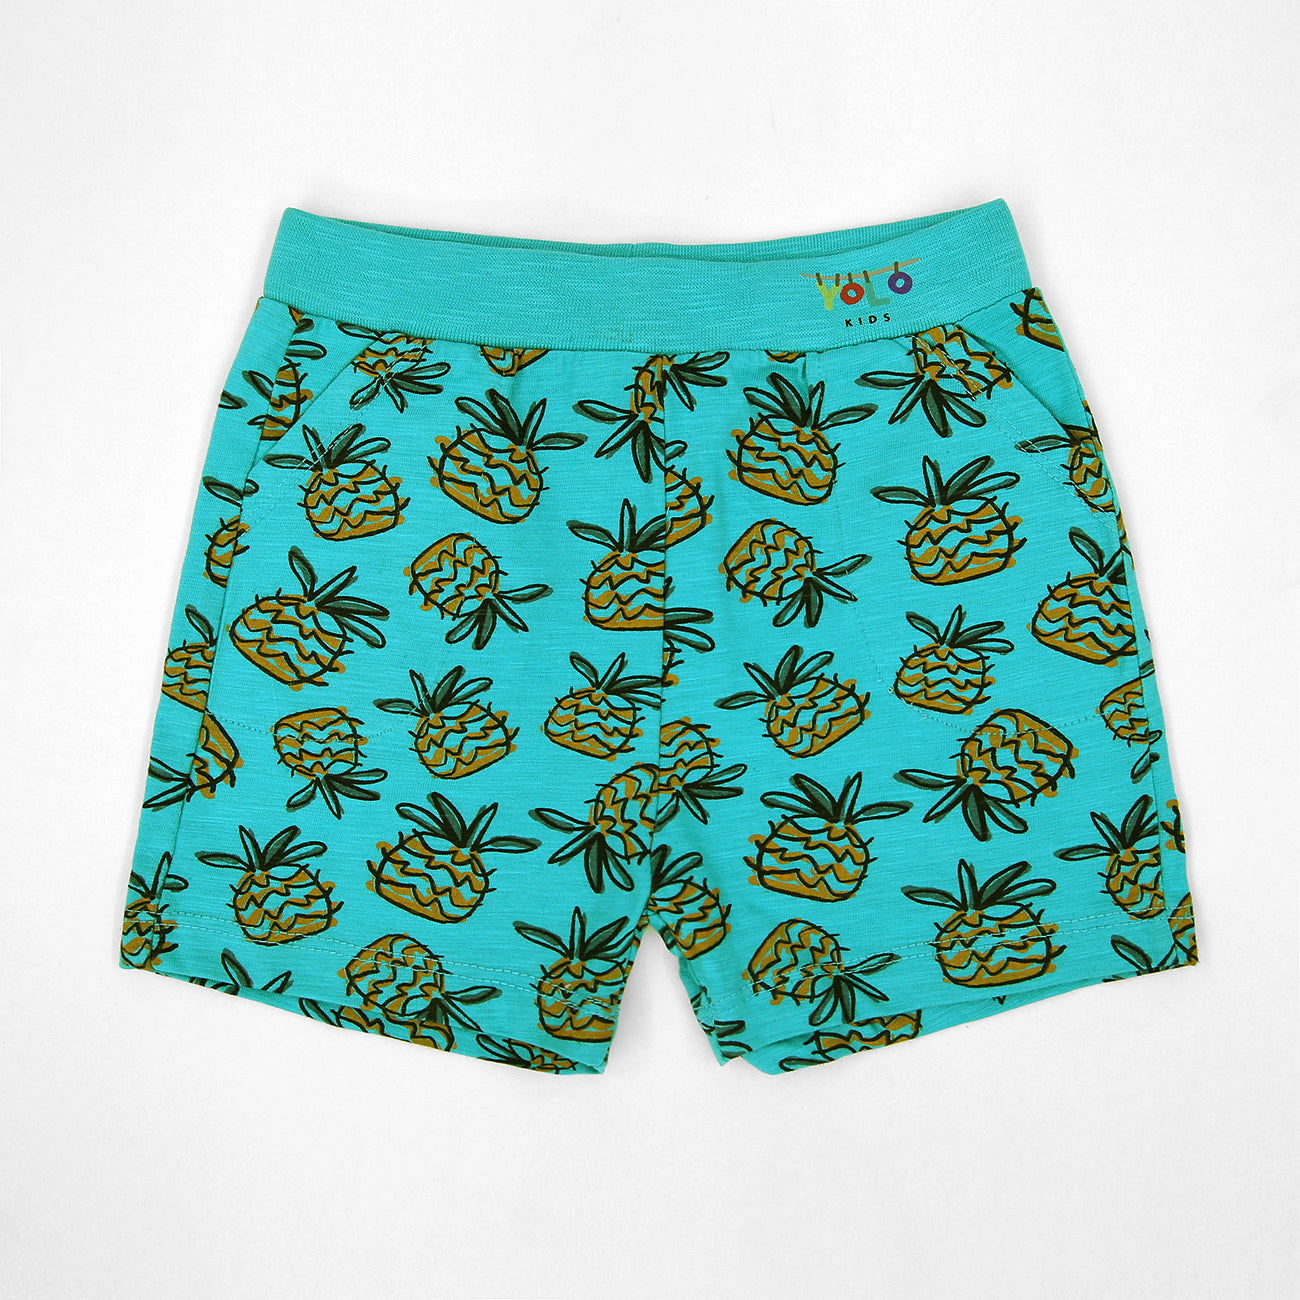 All-Over Printed Soft Cotton Short For Kids (11642)